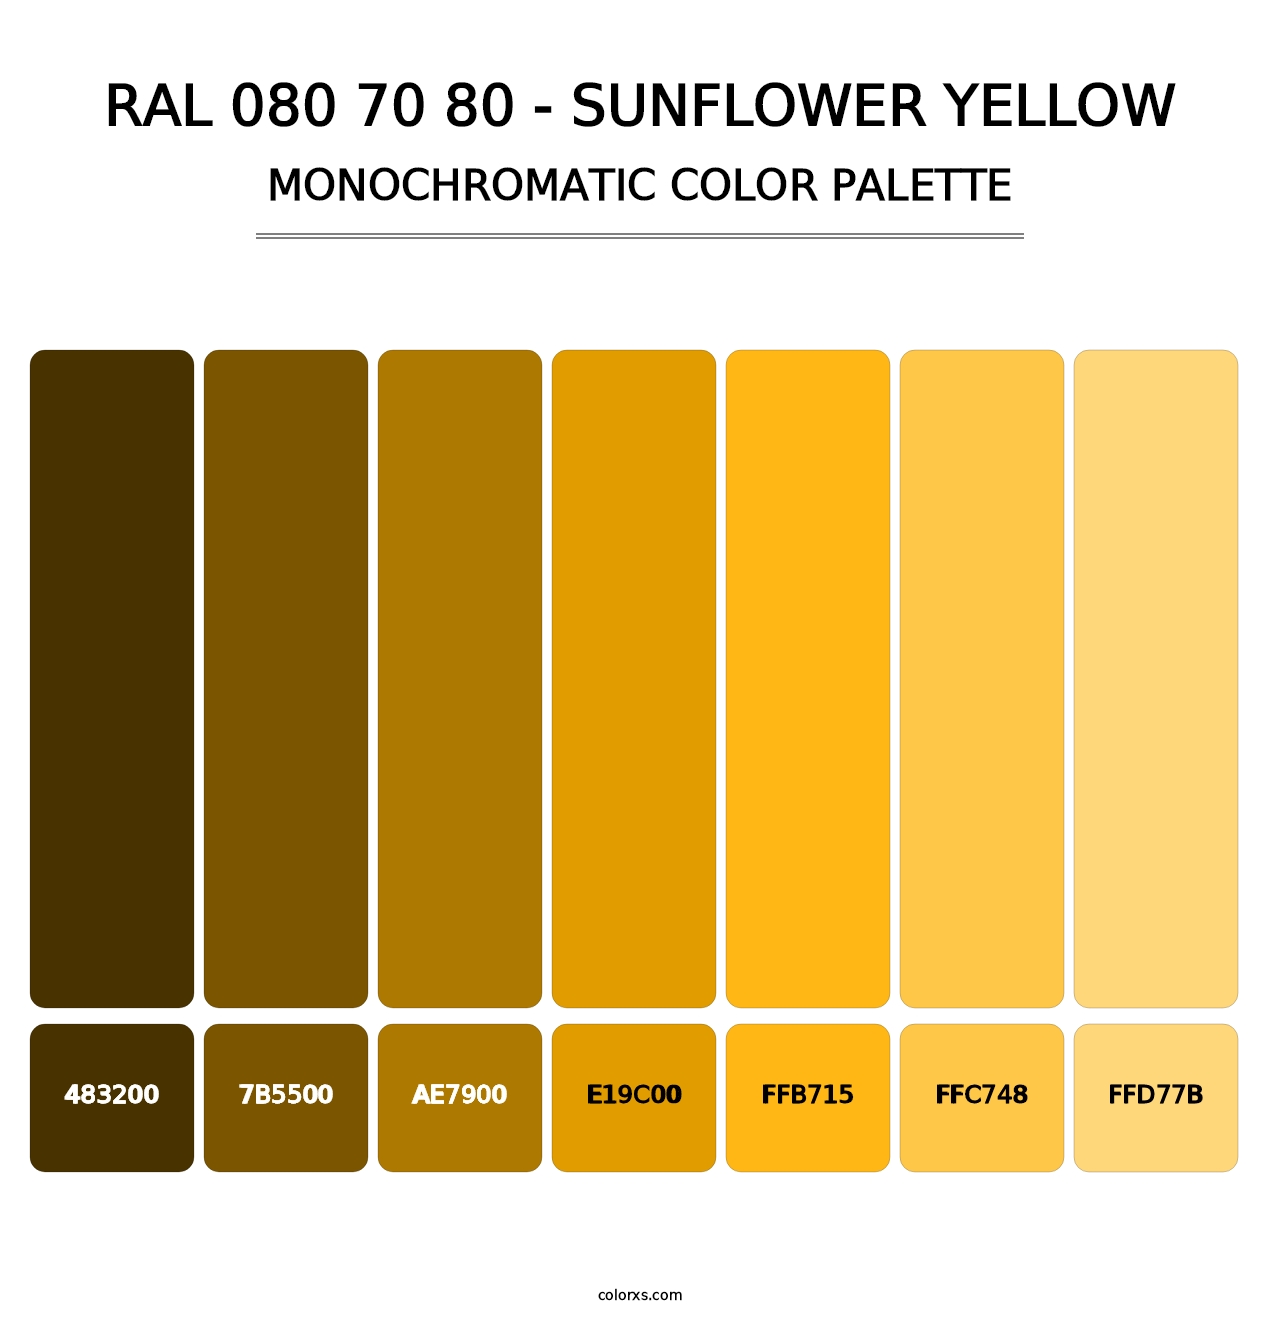 RAL 080 70 80 - Sunflower Yellow - Monochromatic Color Palette